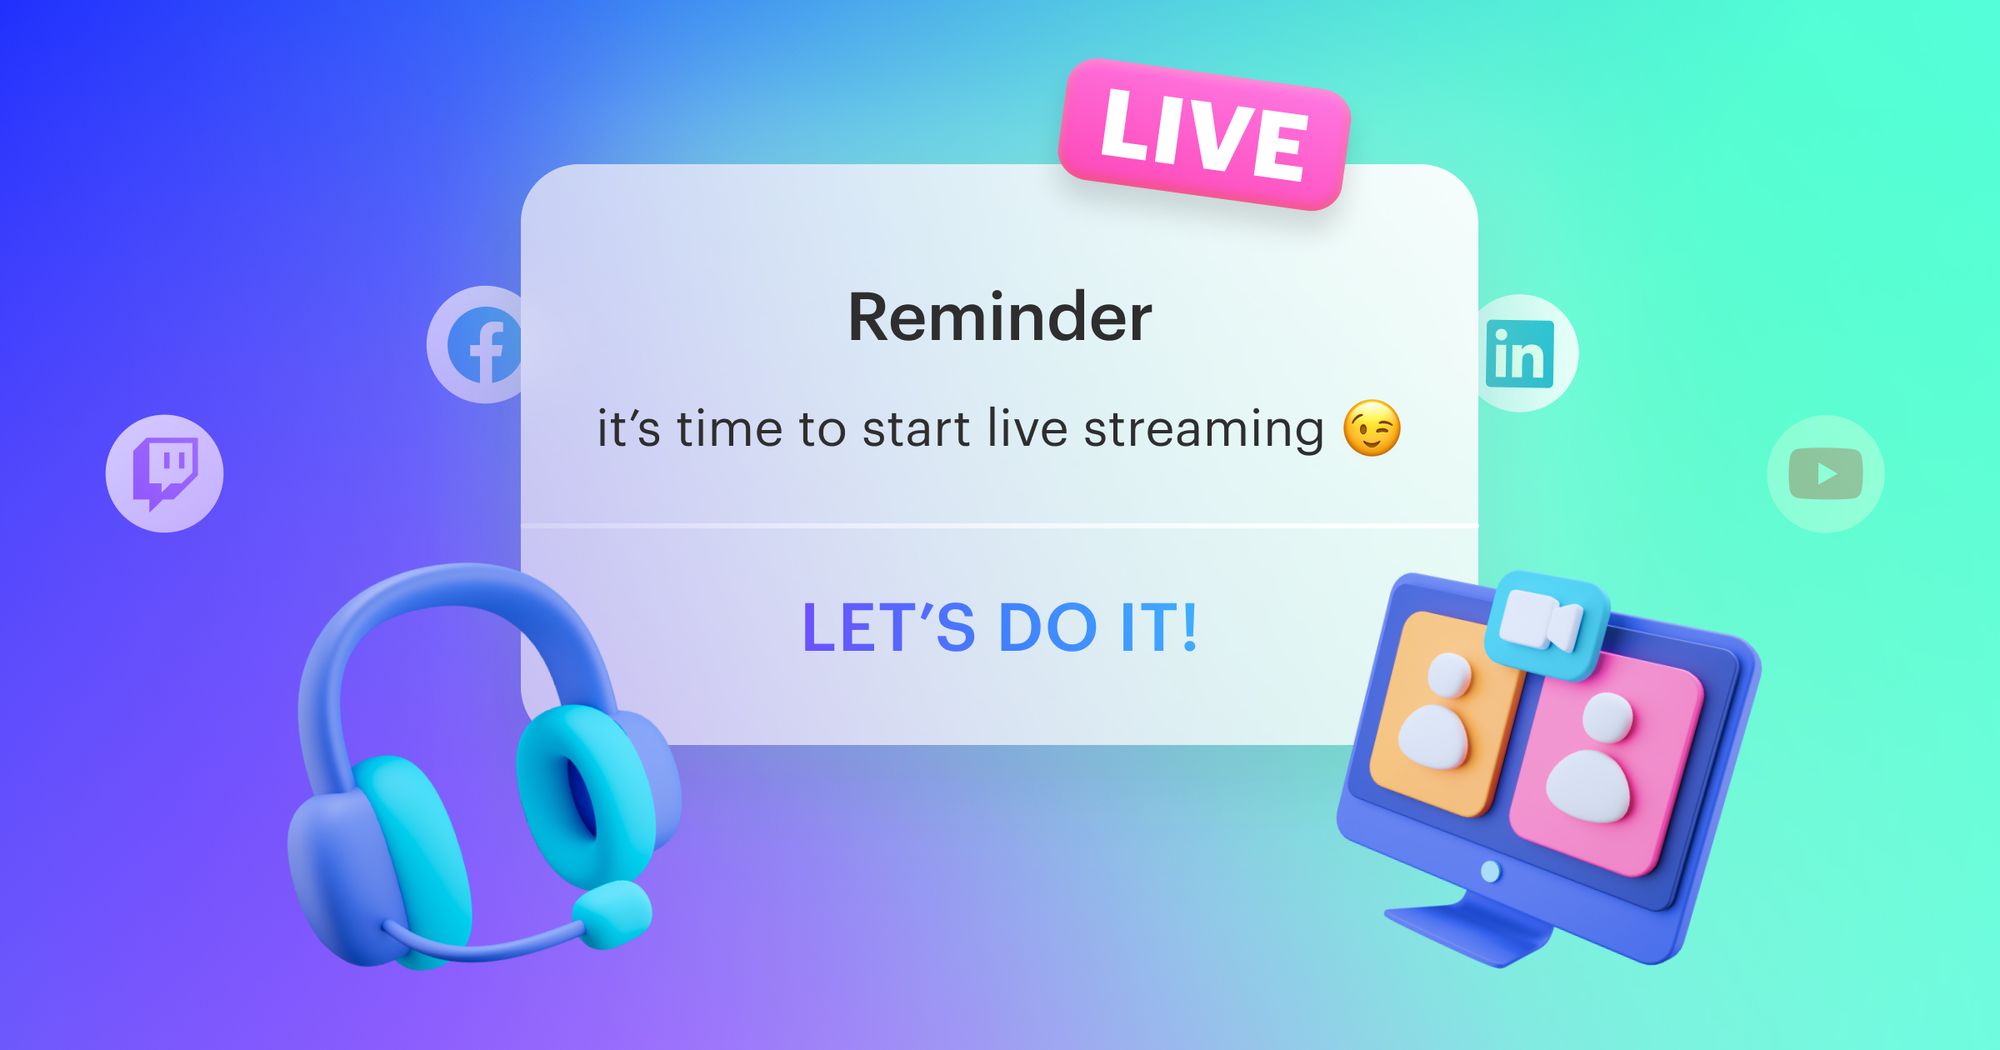 Benefits of live streaming